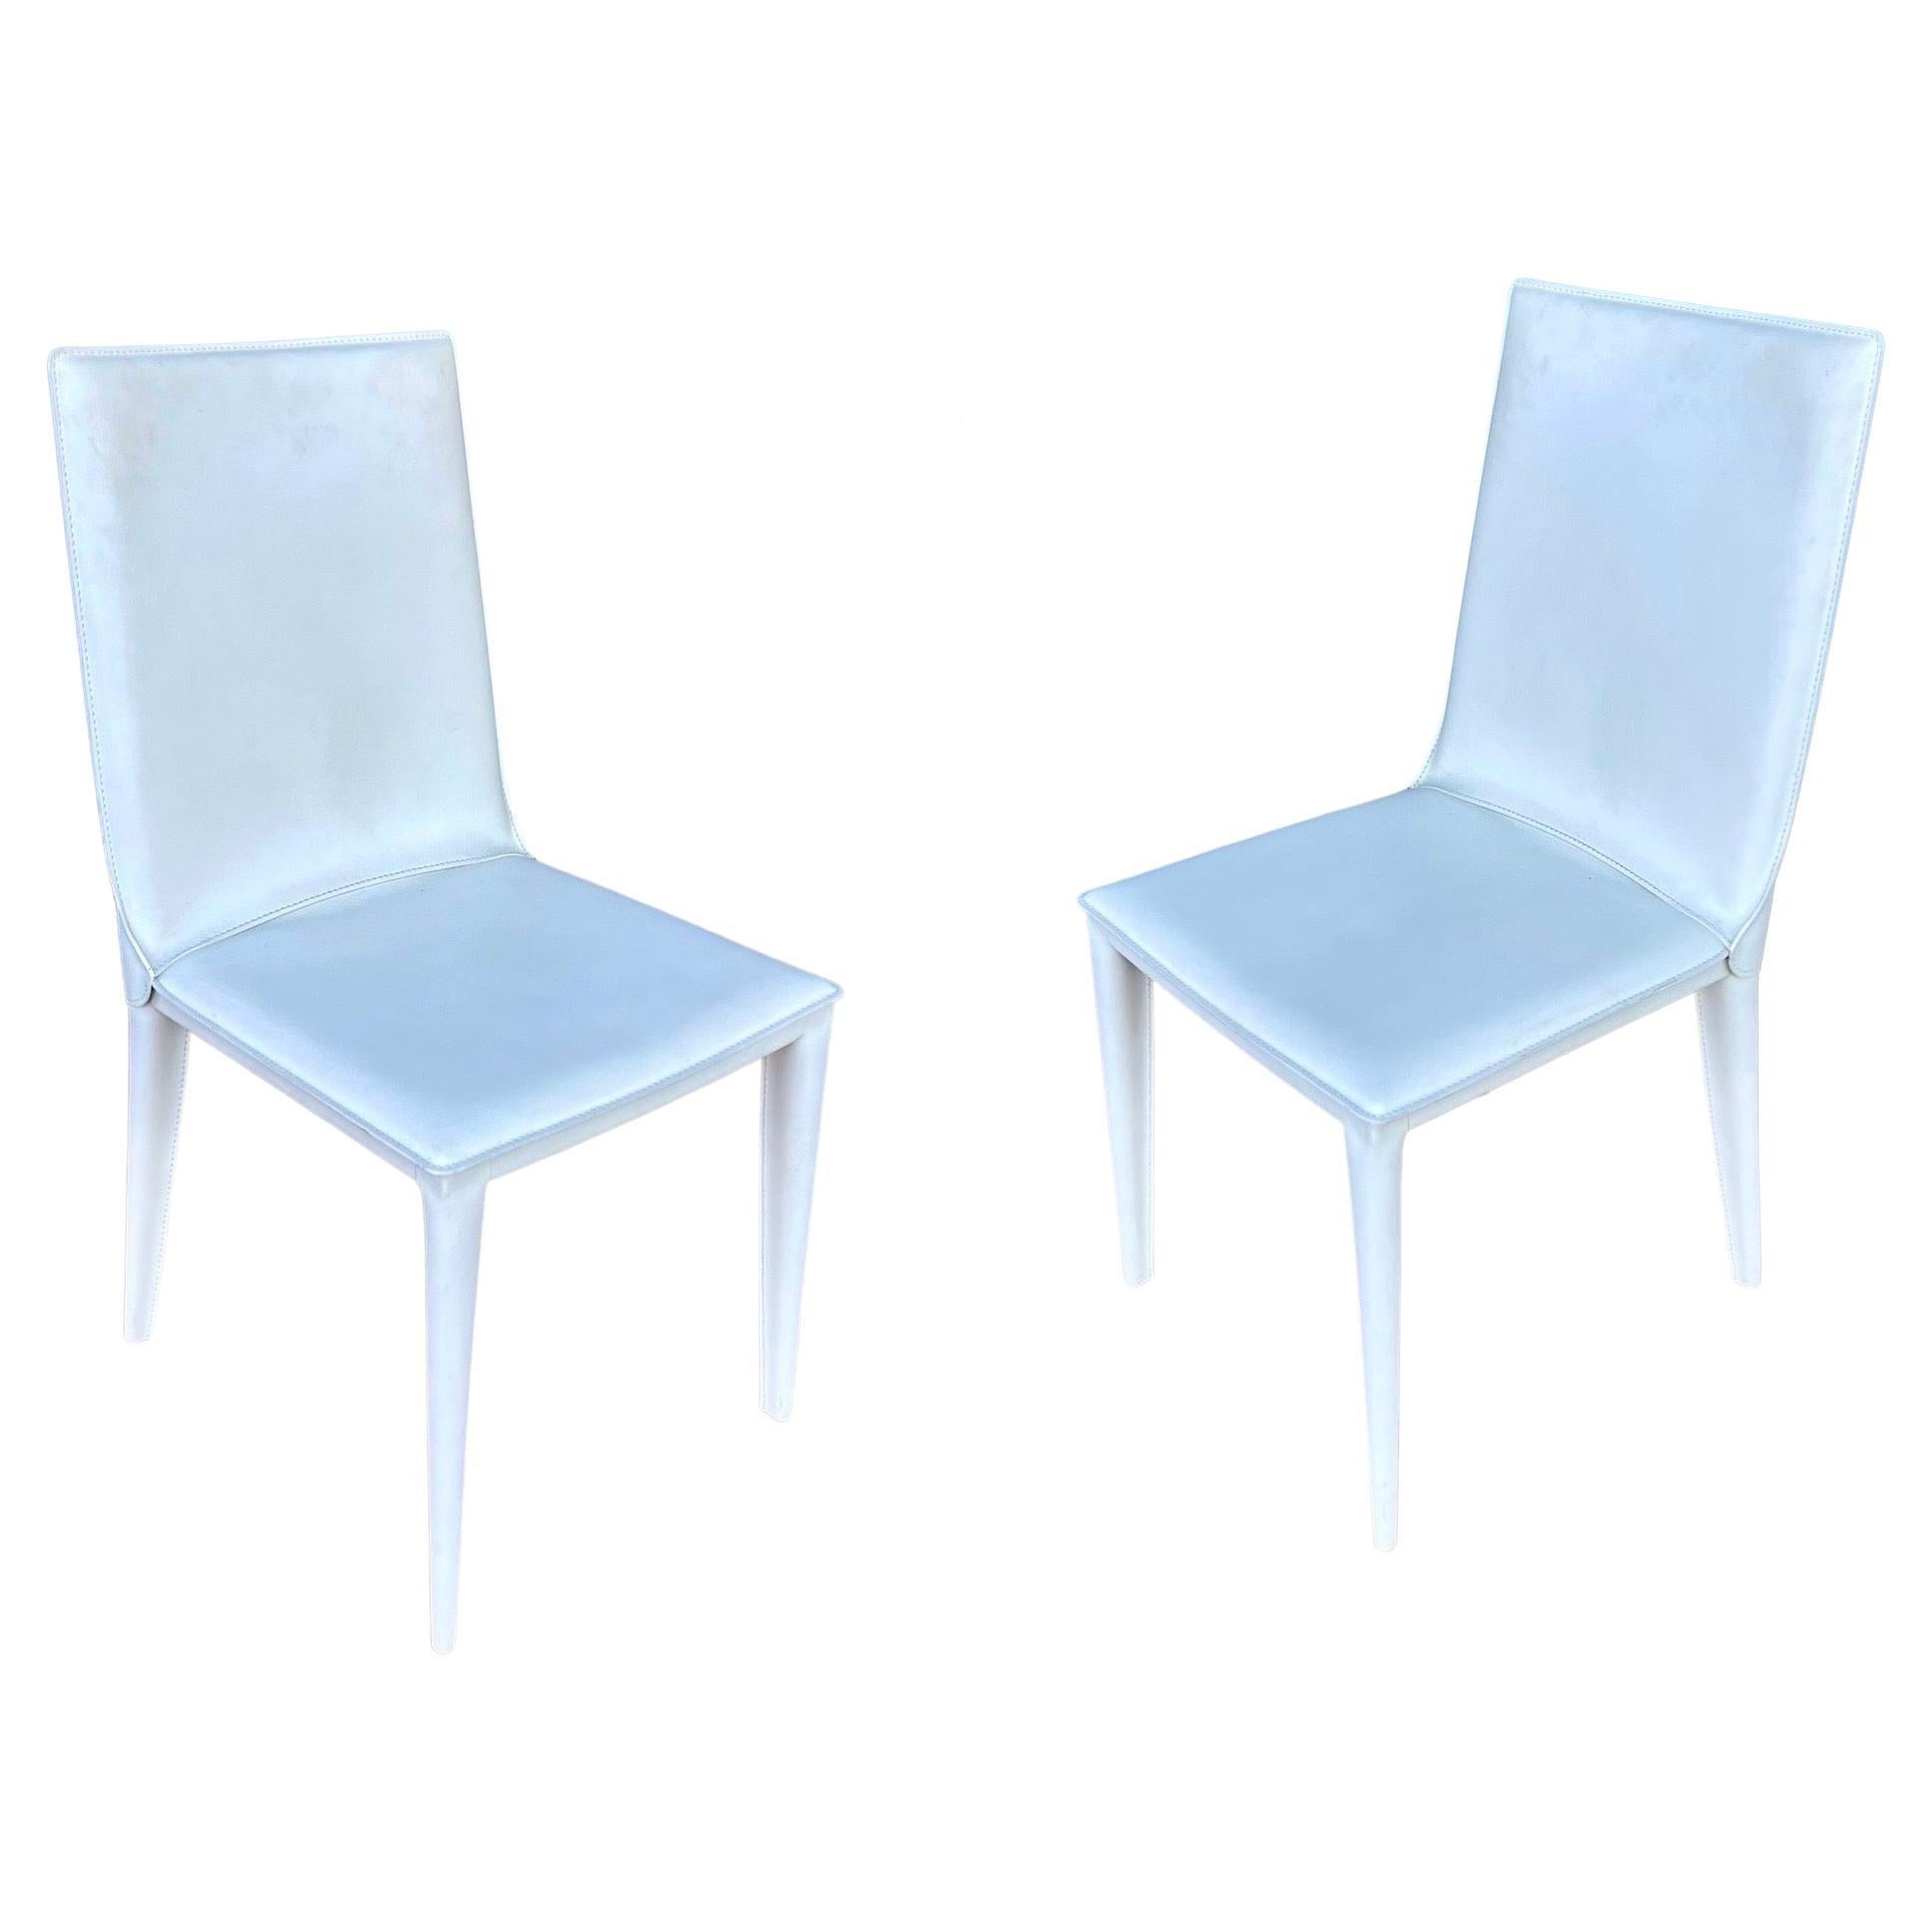 Pair of Postmodern Chairs in Cream Leather Bottega Side Chair by Frag, Italy